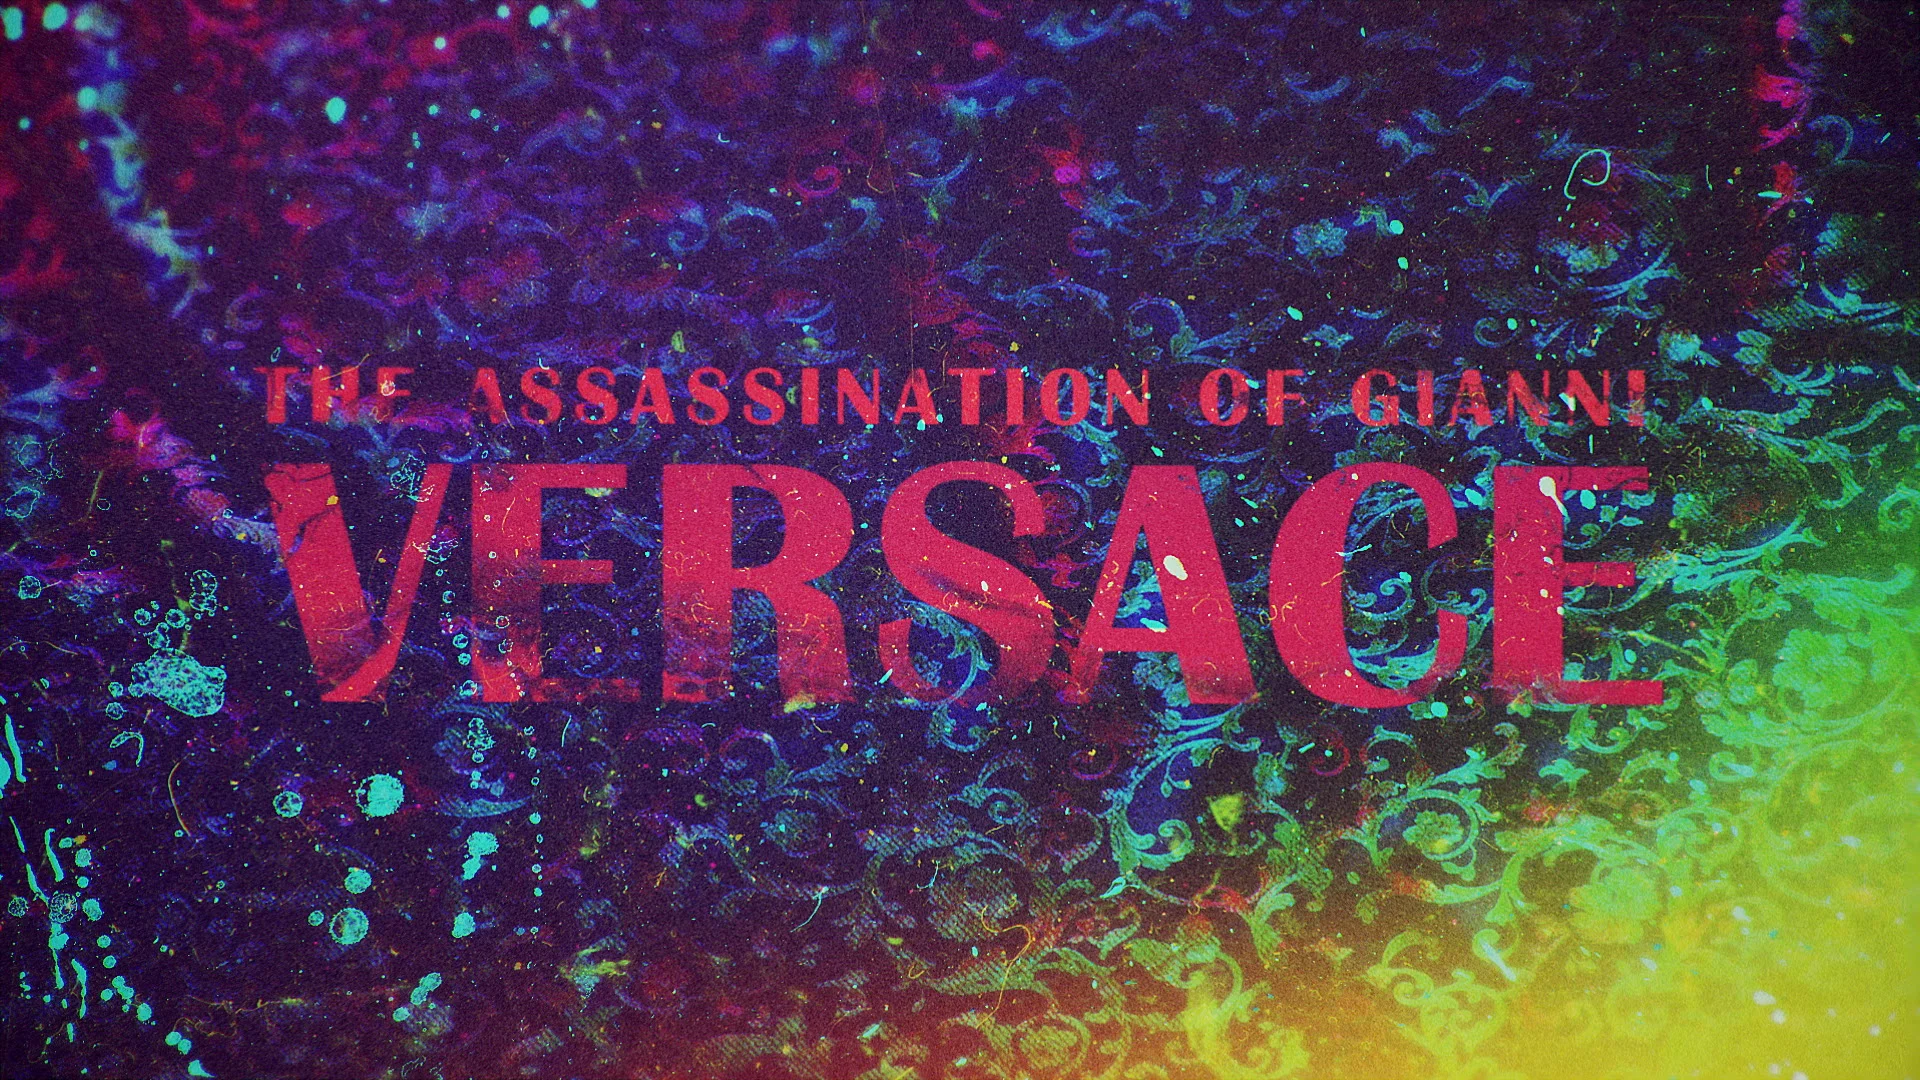 Genre: True crime, and Anthology, Based on "Vulgar Favors: Andrew Cunanan, Gianni Versace, and the Largest Failed Manhunt in U.S. History" by Maureen Orth (s. 2), Developed by Scott Alexander, and Larry Karaszewski (s. 1), Tom Rob Smith (s. 2), Sarah Burgess (s. 3), , with Composer: Mac Quayle, Country of origin: United States, Original language: English, No. of seasons: 3, No. of episodes: 29, Executive producers: Larry Karaszewski, Scott Alexander, Brad Falchuk, Brad Simpson, Nina Jacobson, Dante Di Loreto, Ryan Murphy, Alexis Martin Woodall, Tom Rob Smith, Daniel Minahan, Sarah Paulson, and Sarah Burgess, Producers: Chip Vucelich, John Travolta (s.1), Alexis Martin Woodall (s.1), Eric Kovtun, Lou Eyrich, Eryn Krueger Mekash, Beanie Feldstein (s. 3), and Monica Lewinsky (s. 3), Production locations: Los Angeles, California (Season 1, 3), and Miami, Florida (Season 2), with Cinematography by Nelson Cragg, with Editors: Adam Penn, C. Chi-Yoon Chung, and Stewart Schill, Running time: 42–74 minutes, Production companies: Scott & Larry Productions (season 1), Color Force, Ryan Murphy Television, FXP,and 20th Television, Original Network: FX (2018-)